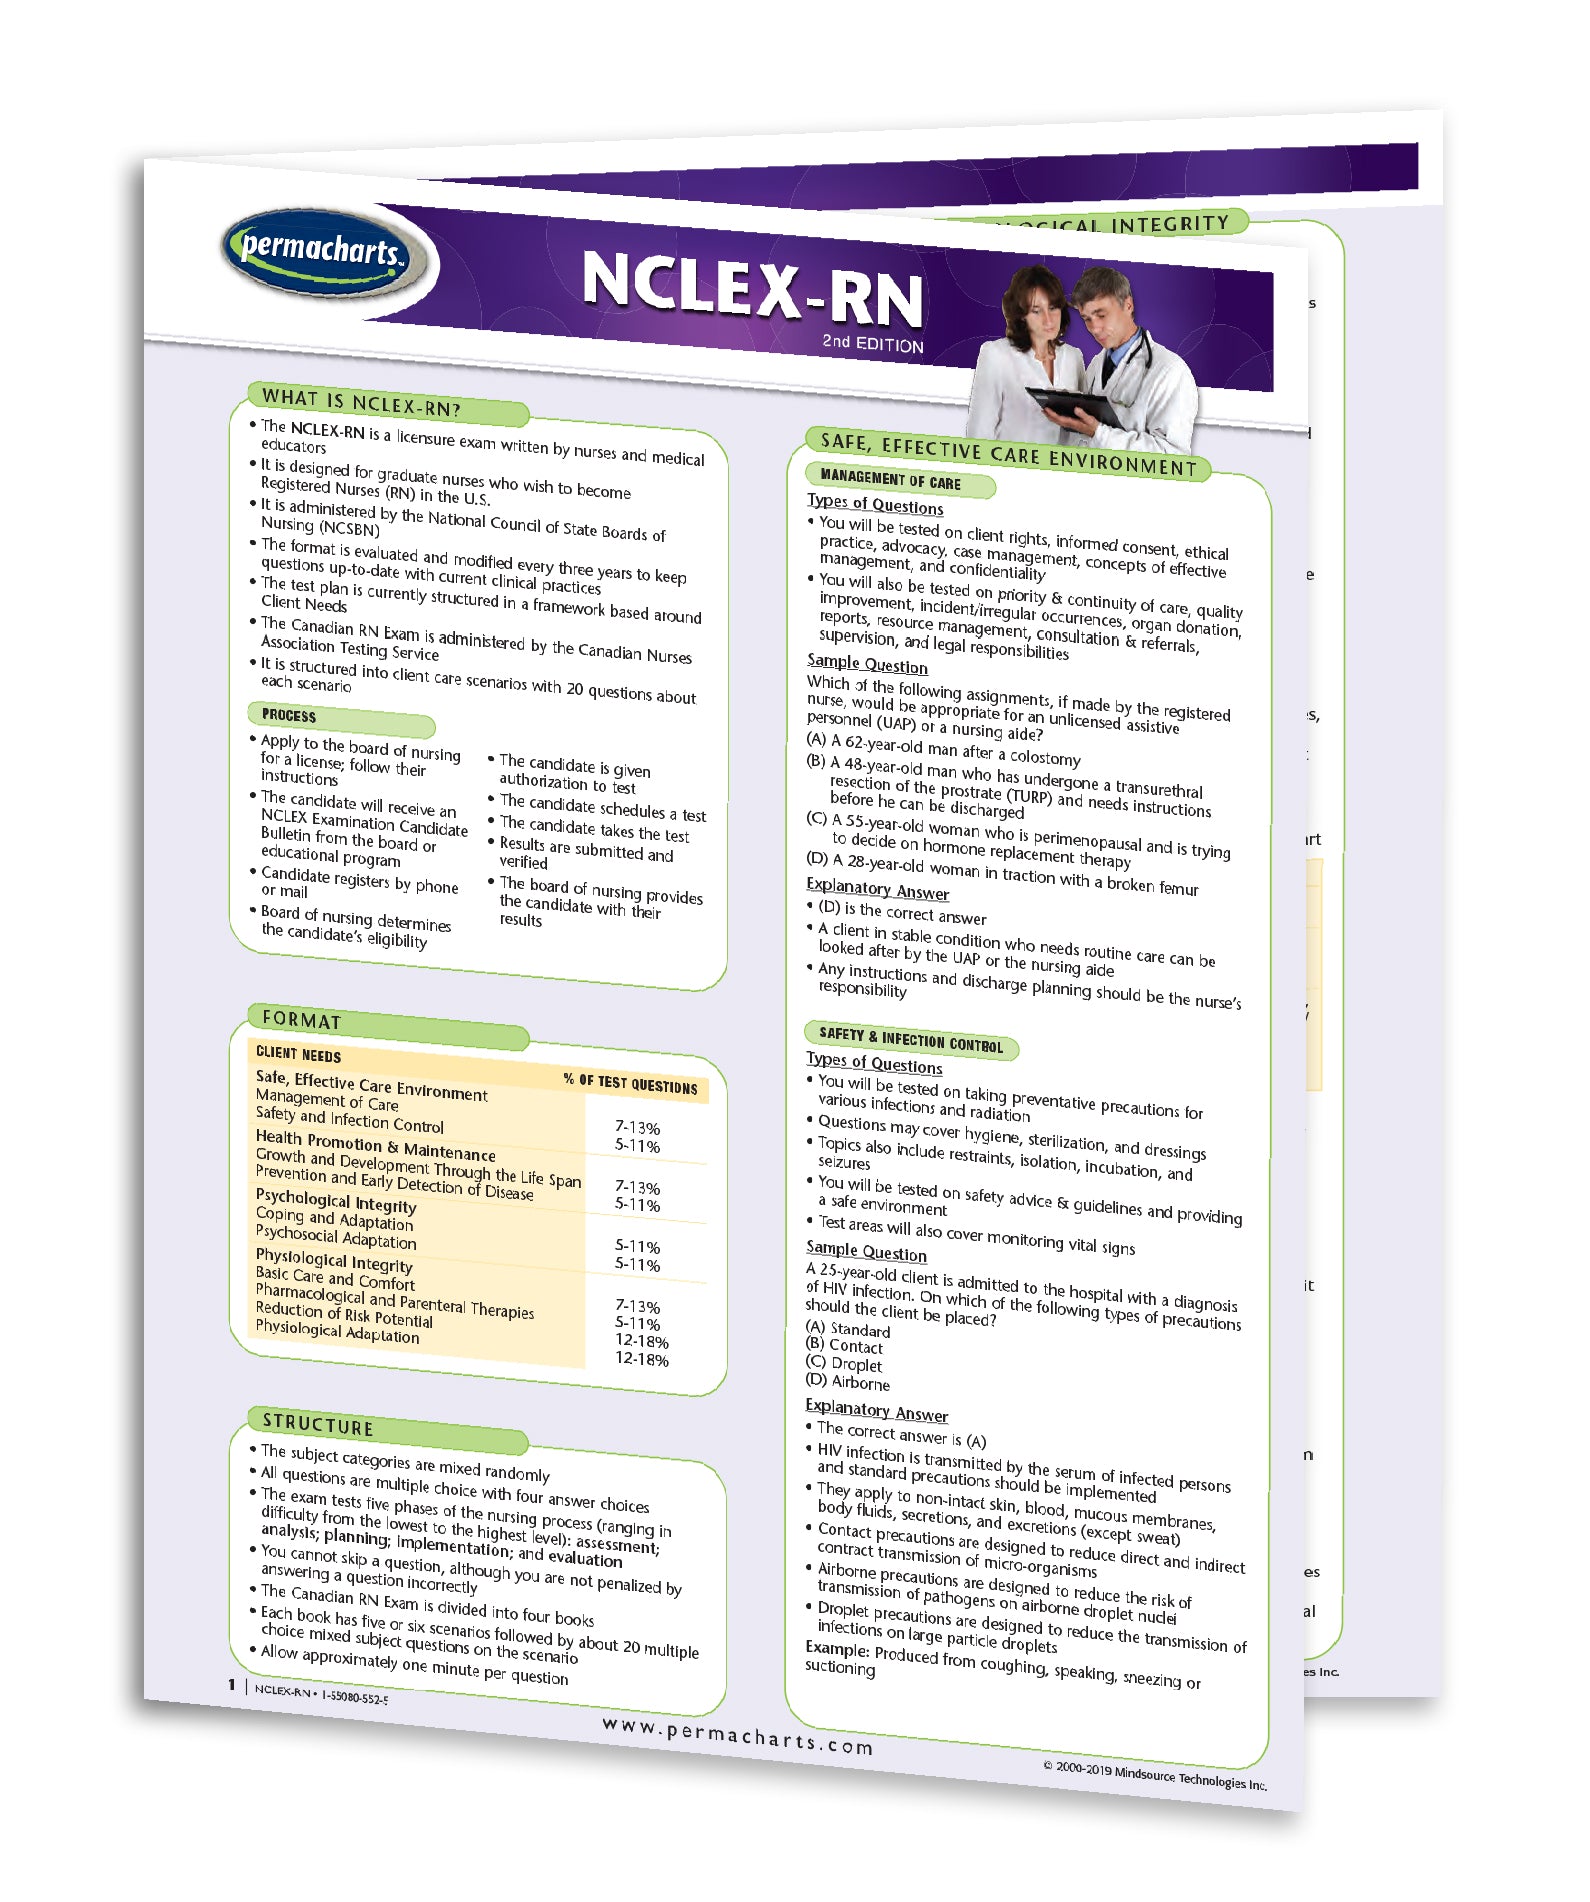 nclex-rn-nursing-exam-guide-quick-reference-chart